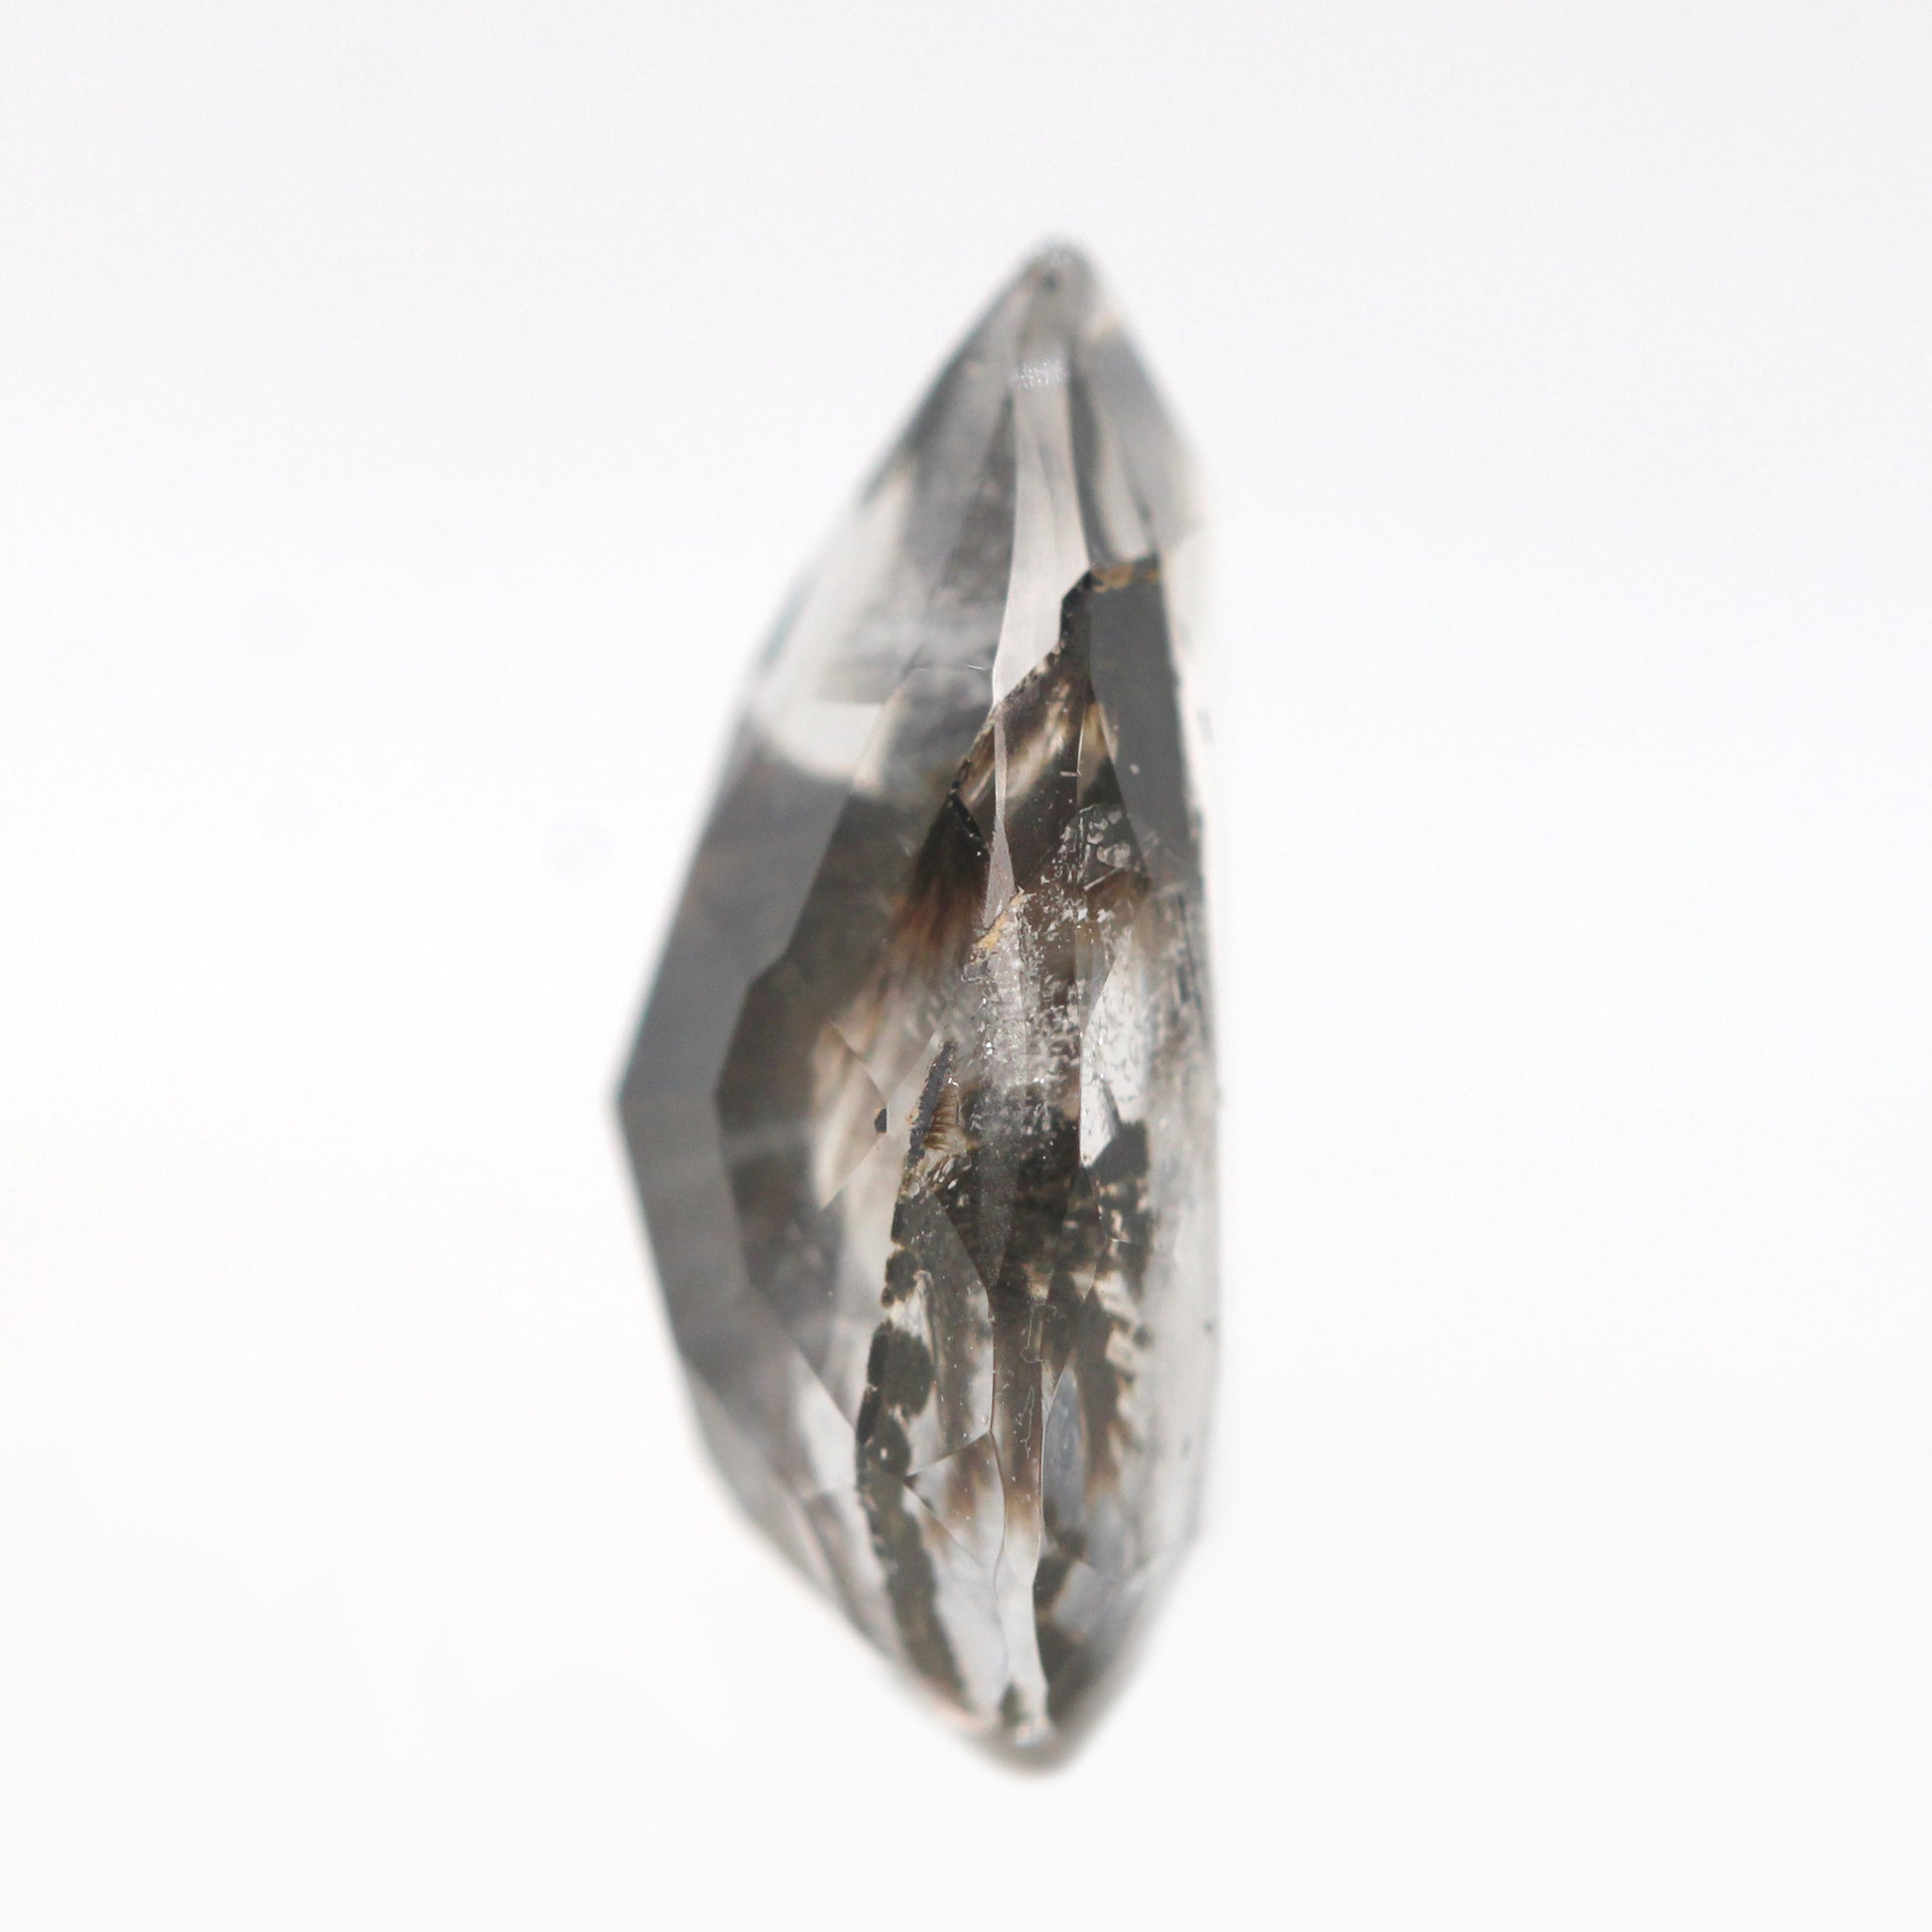 2.72 Carat Pear Dendritic Quartz for Custom Work - Inventory Code DQP272 - Midwinter Co. Alternative Bridal Rings and Modern Fine Jewelry